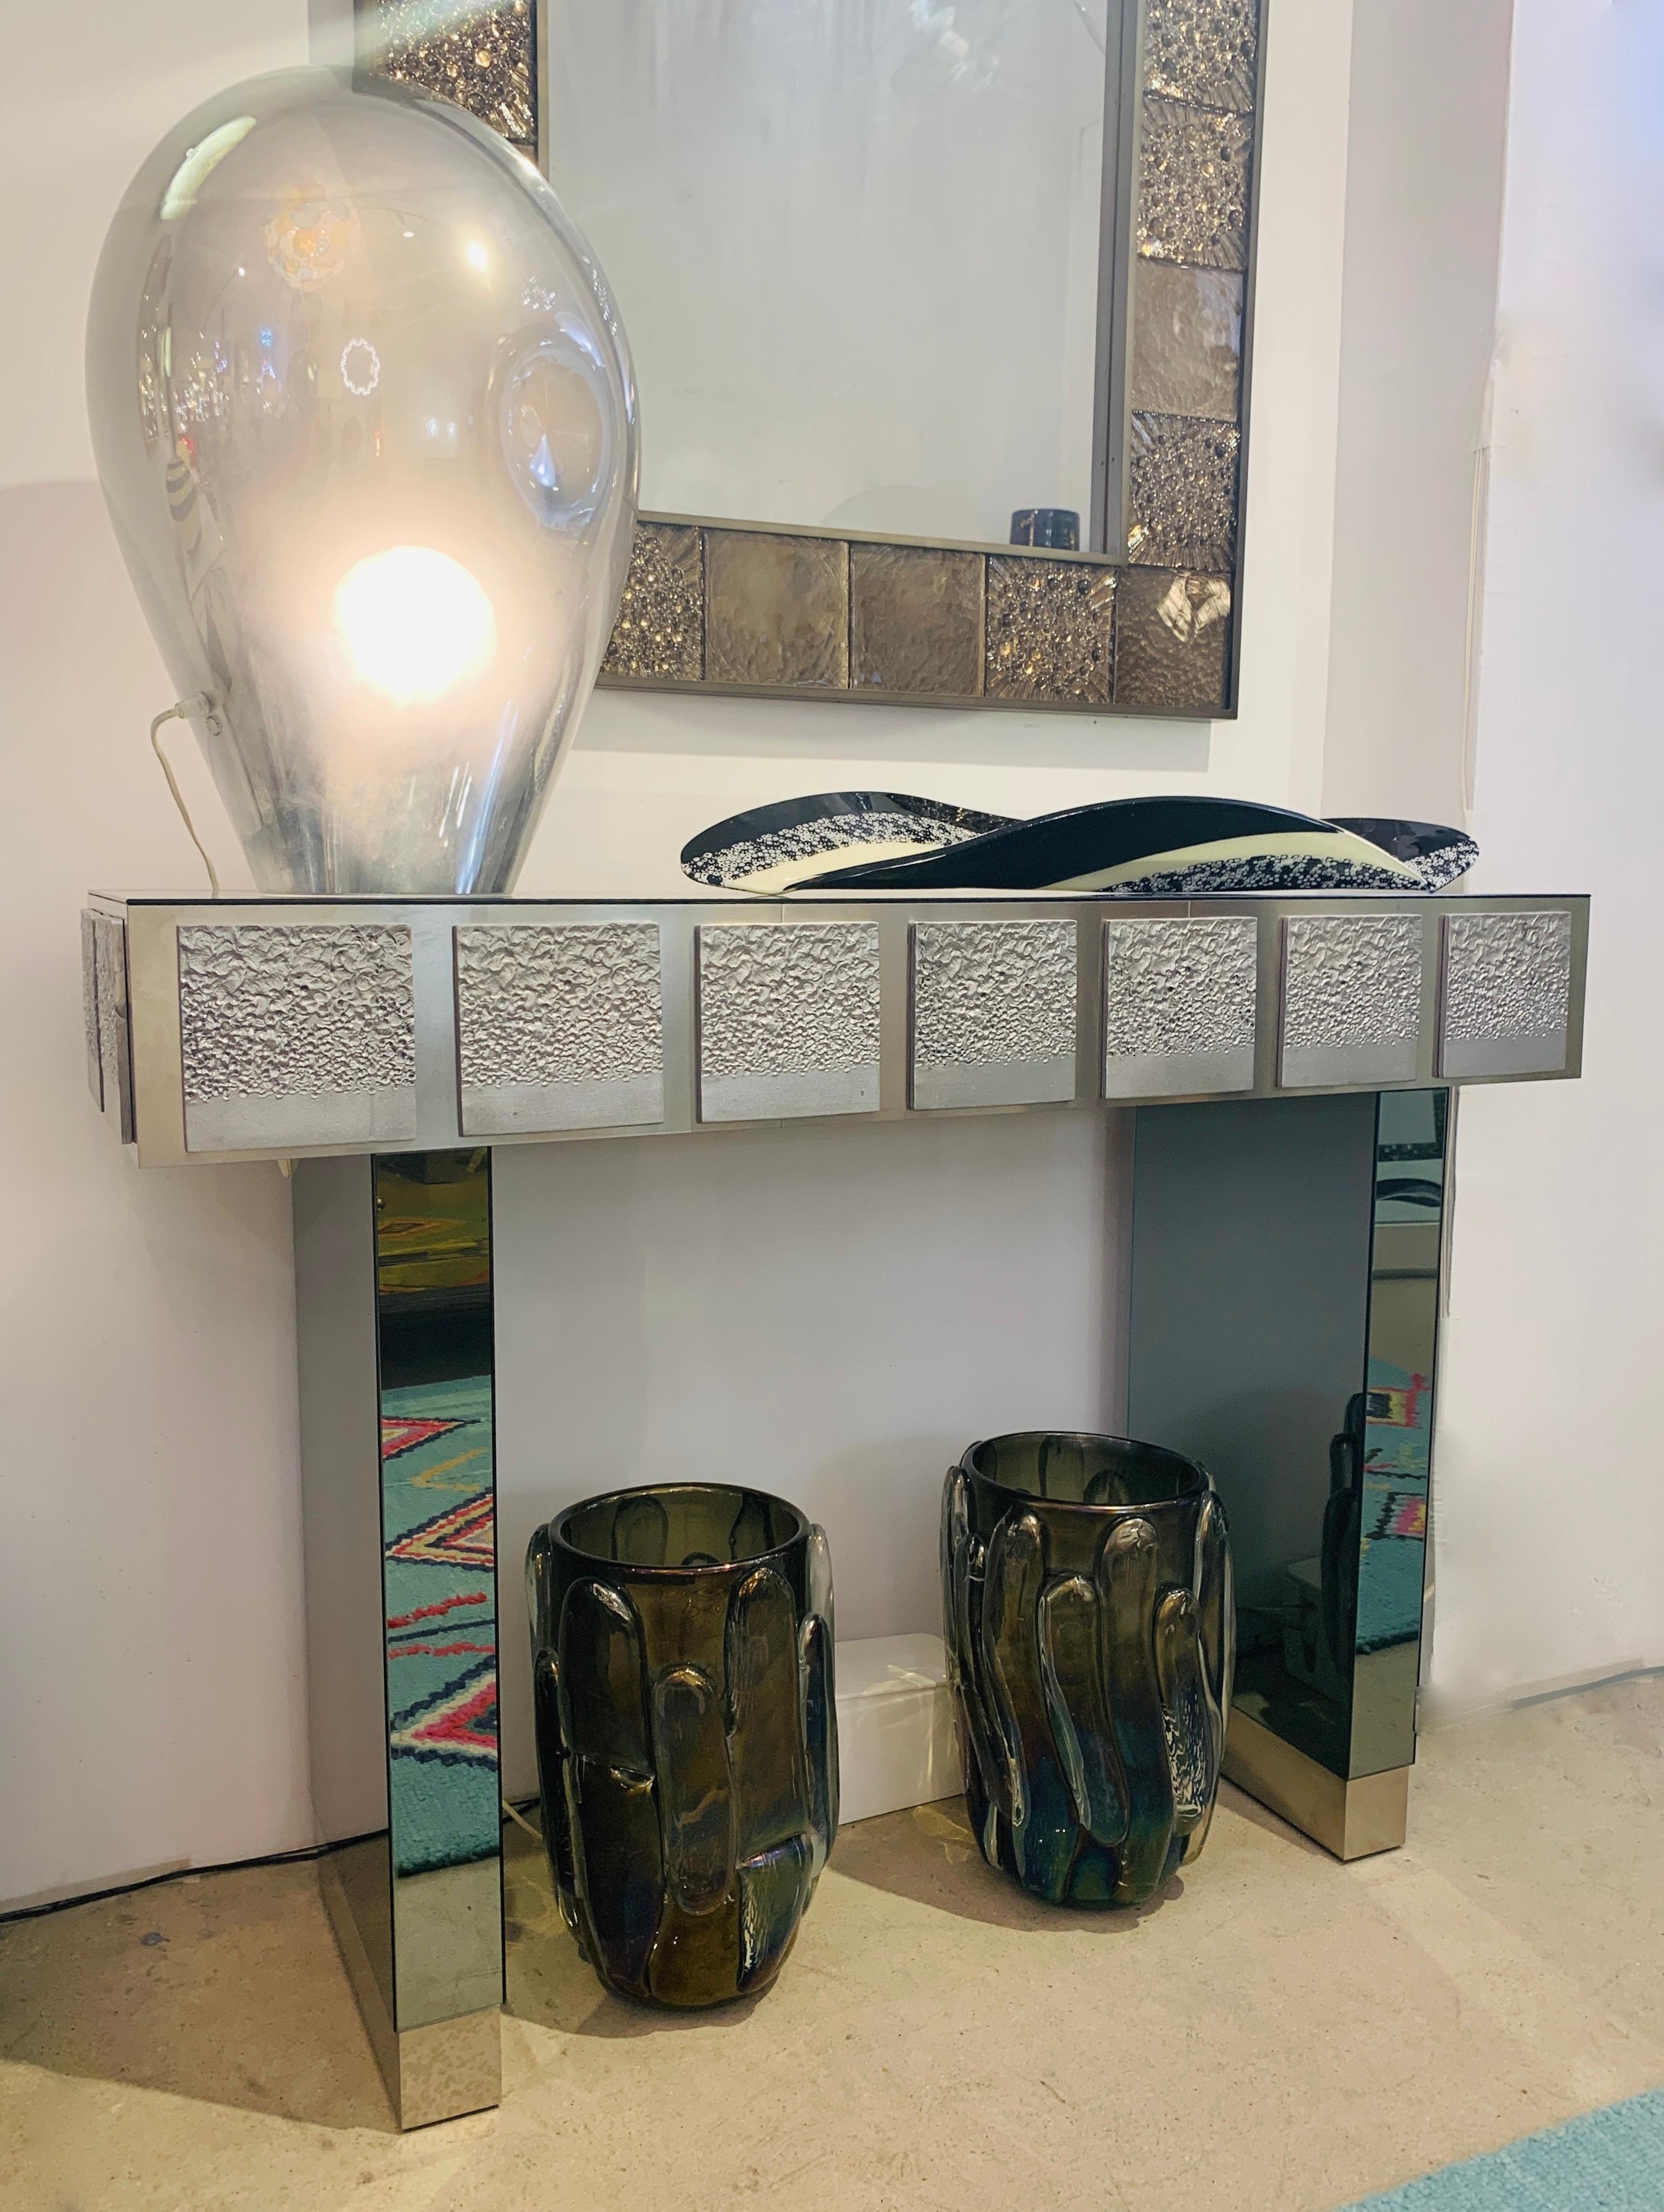 Cast Bespoke Italian Contemporary One-of-a-Kind Polished Steel Smoked Mirror Console For Sale